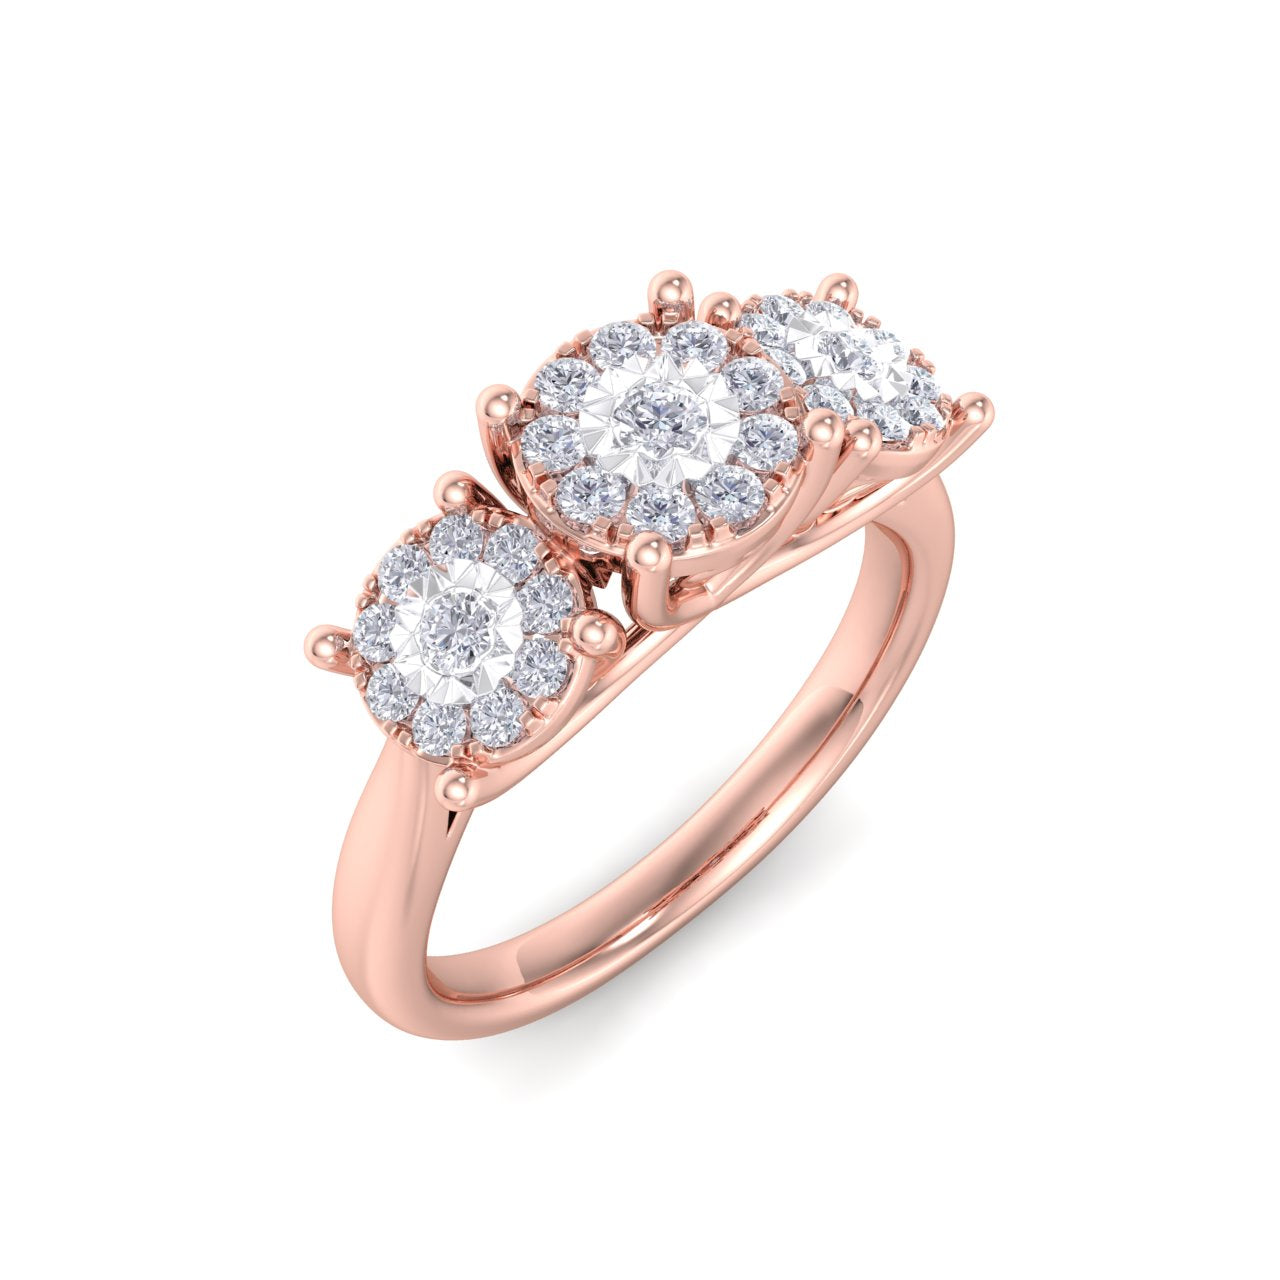 Three stones diamond ring with miracle plates in rose gold with white diamonds of 0.37 ct in weight